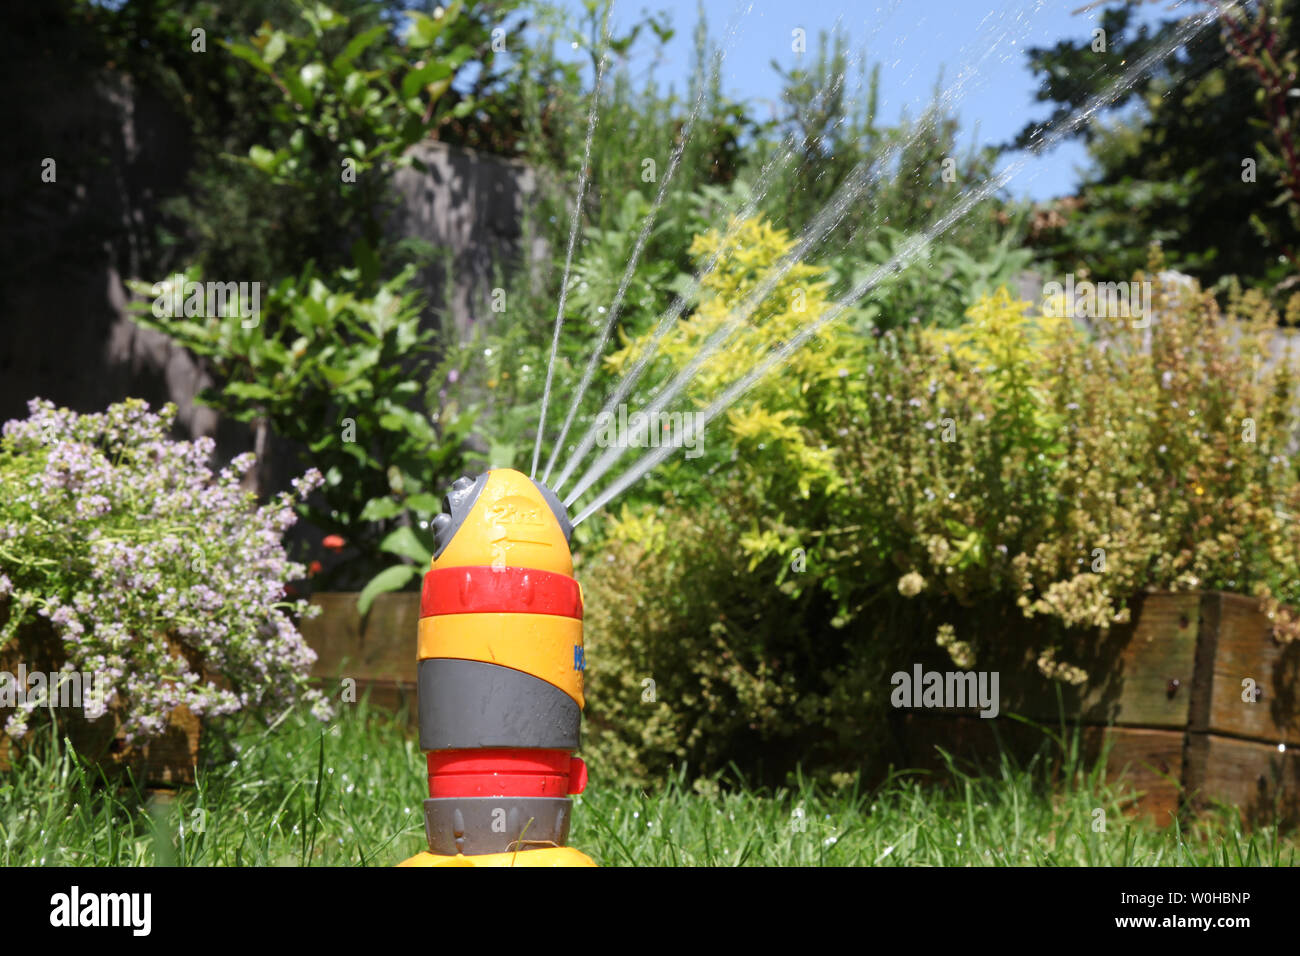 Hozelock sprinkler head spraying water onto herbs and lawn on a summers day in a British garden with plants in background Stock Photo